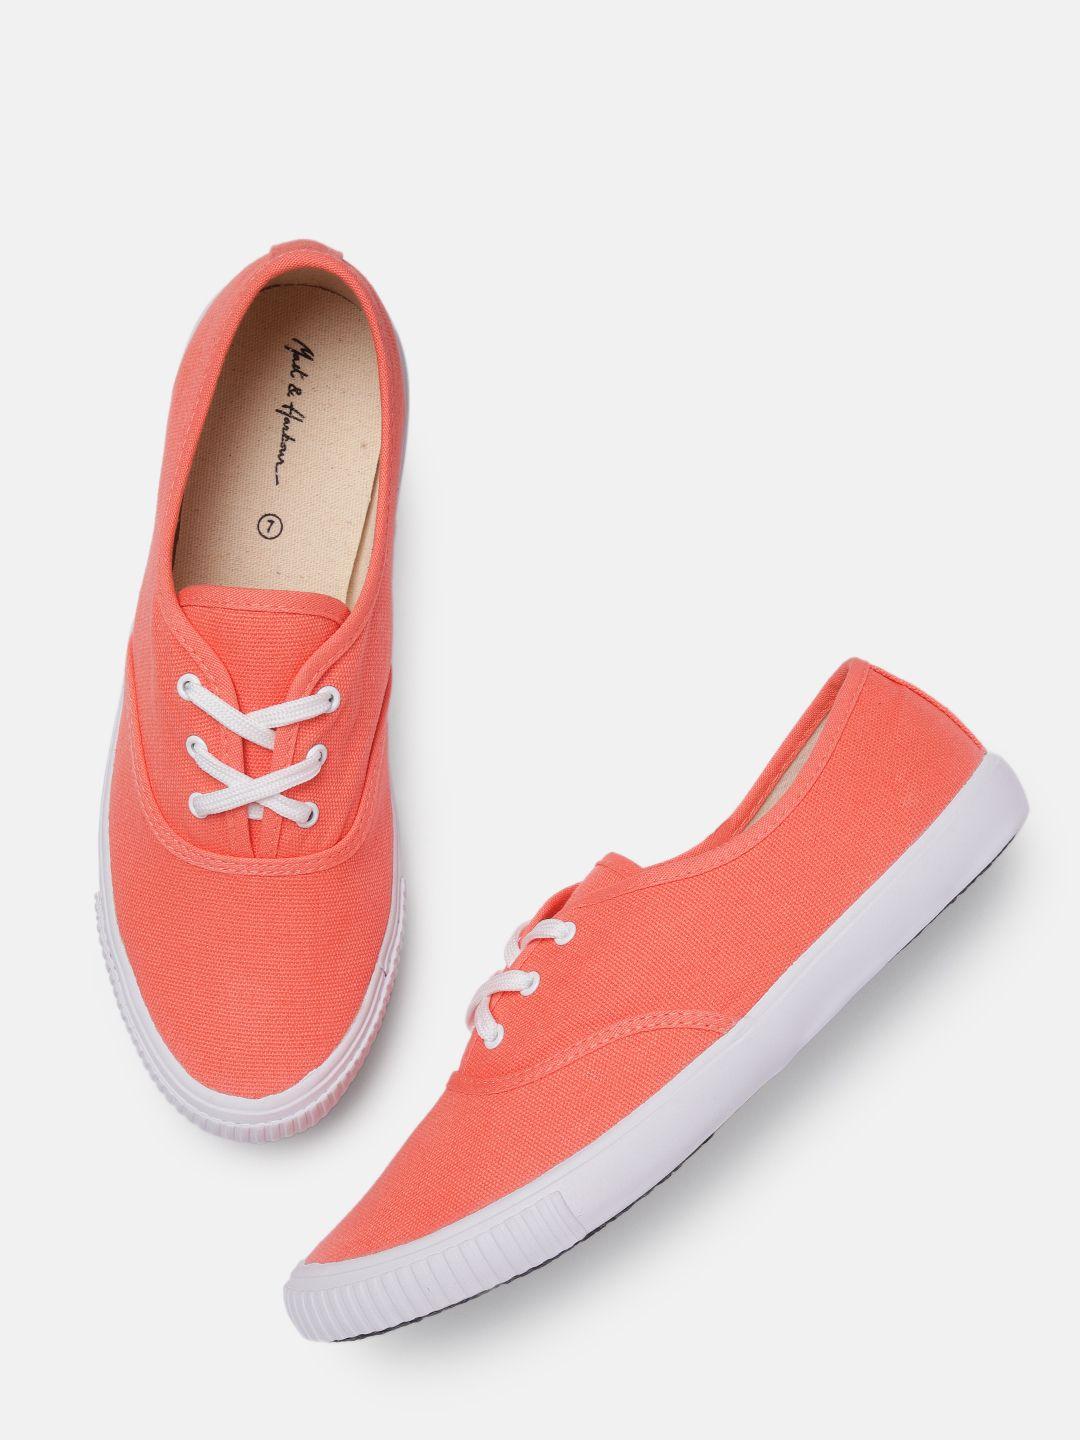 mast & harbour women coral red sneakers